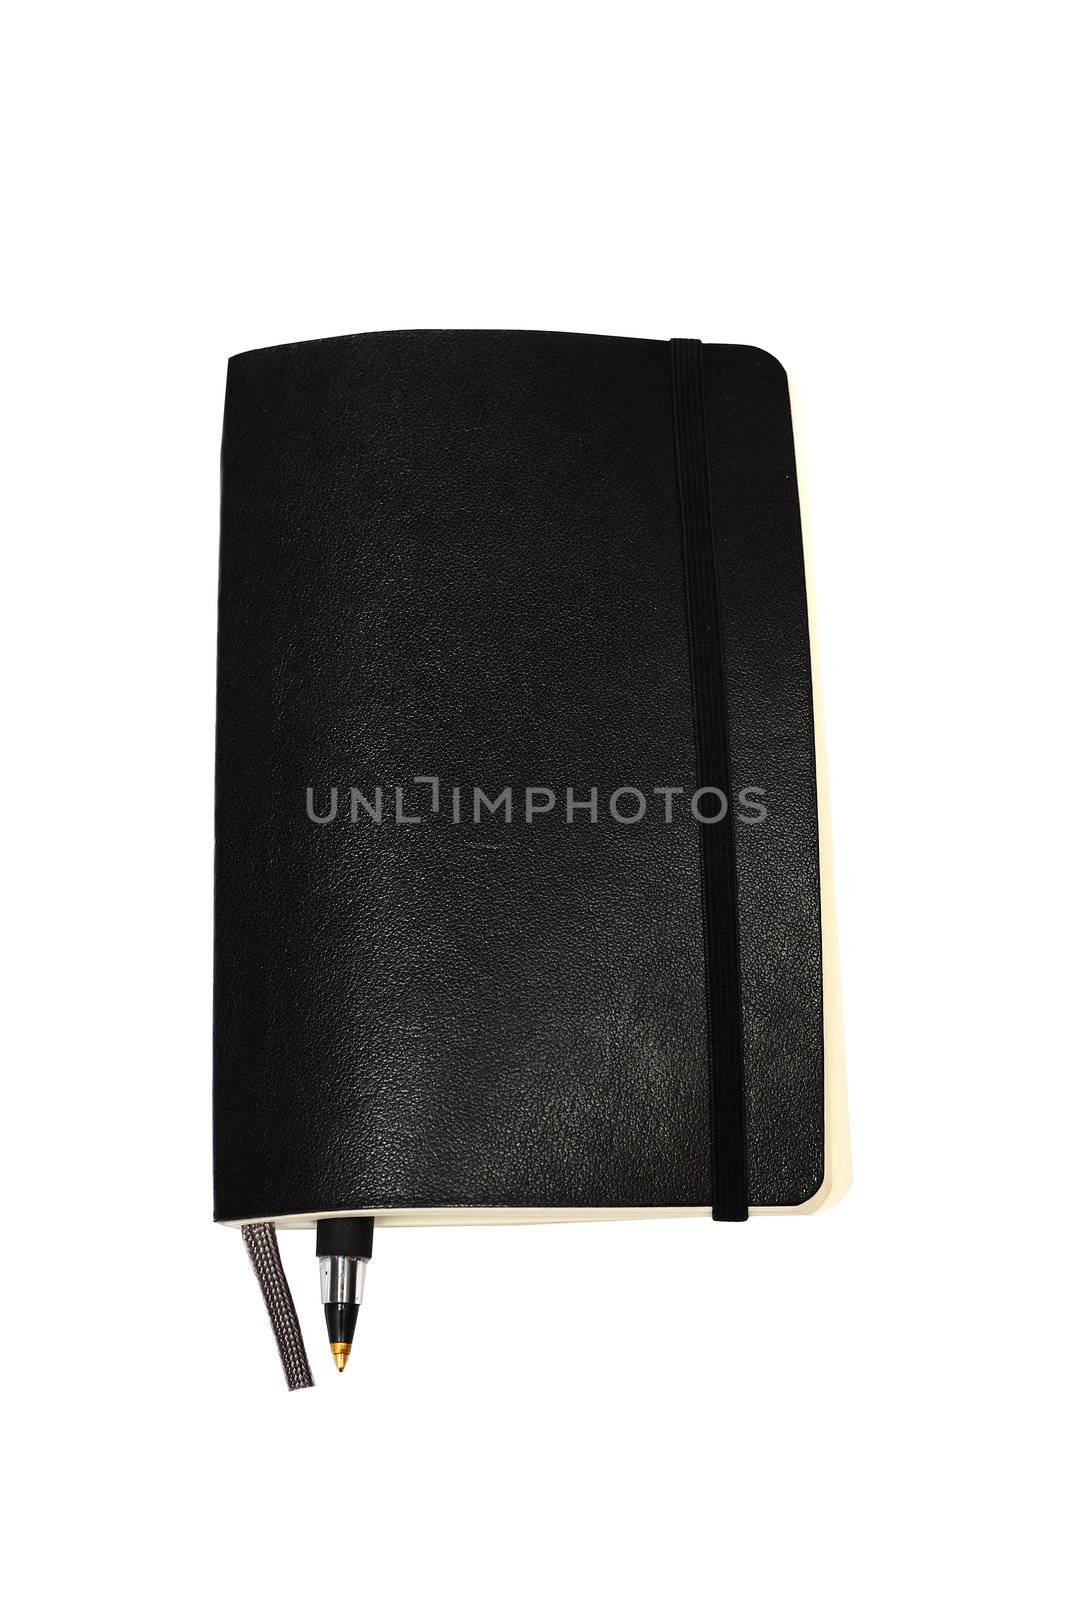 An image of Moleskine notebook on white background